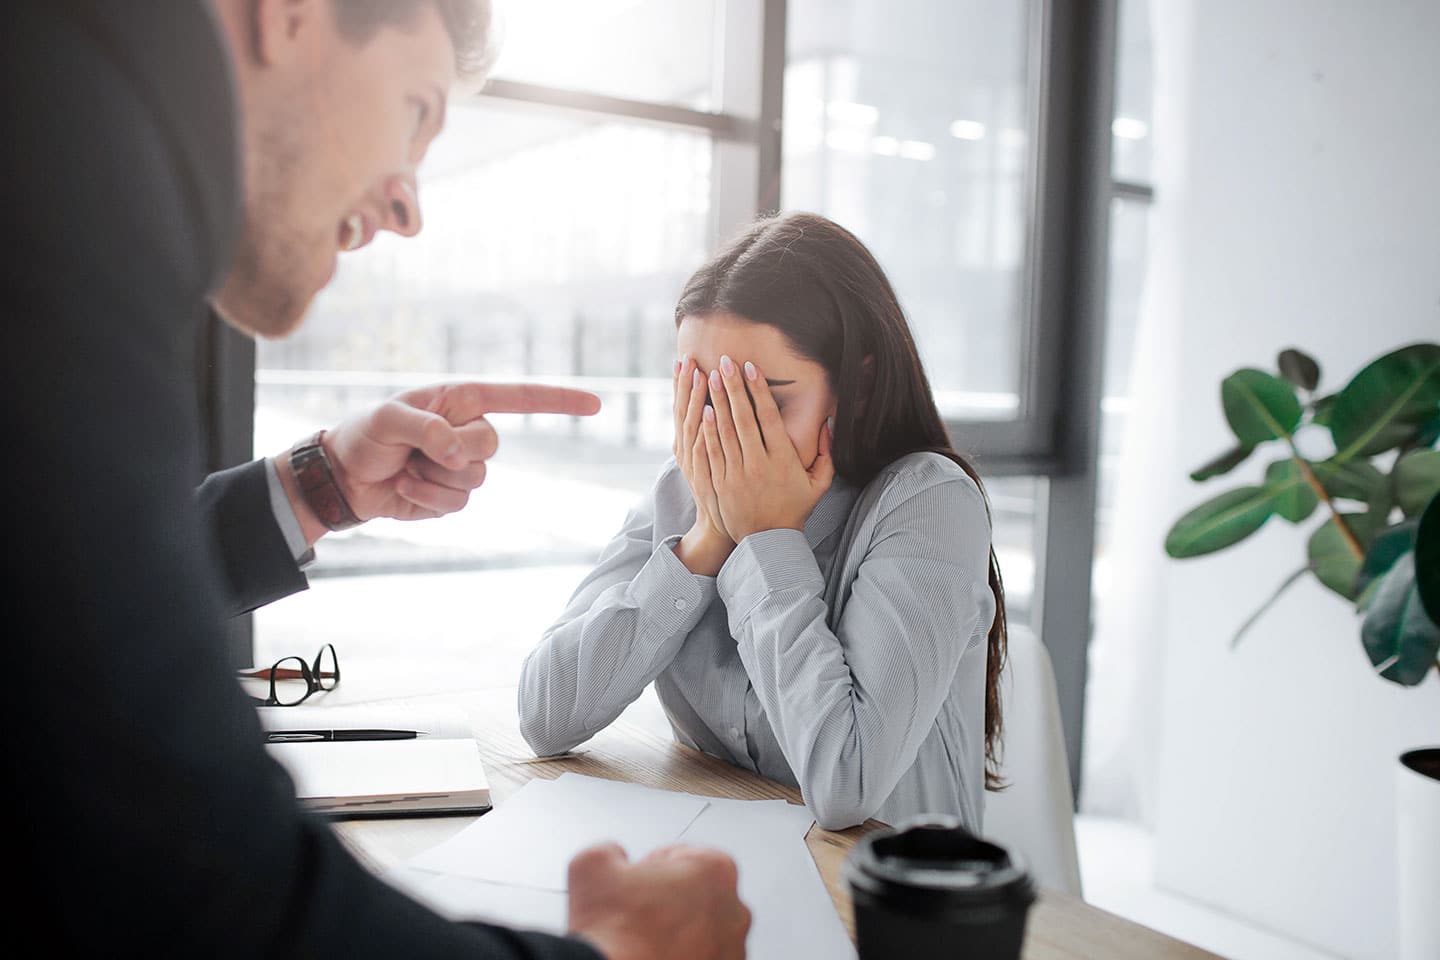 Rude Man Points On Crying Woman | Employment Discrimination Lawyer | Gash & Associates, P.C.